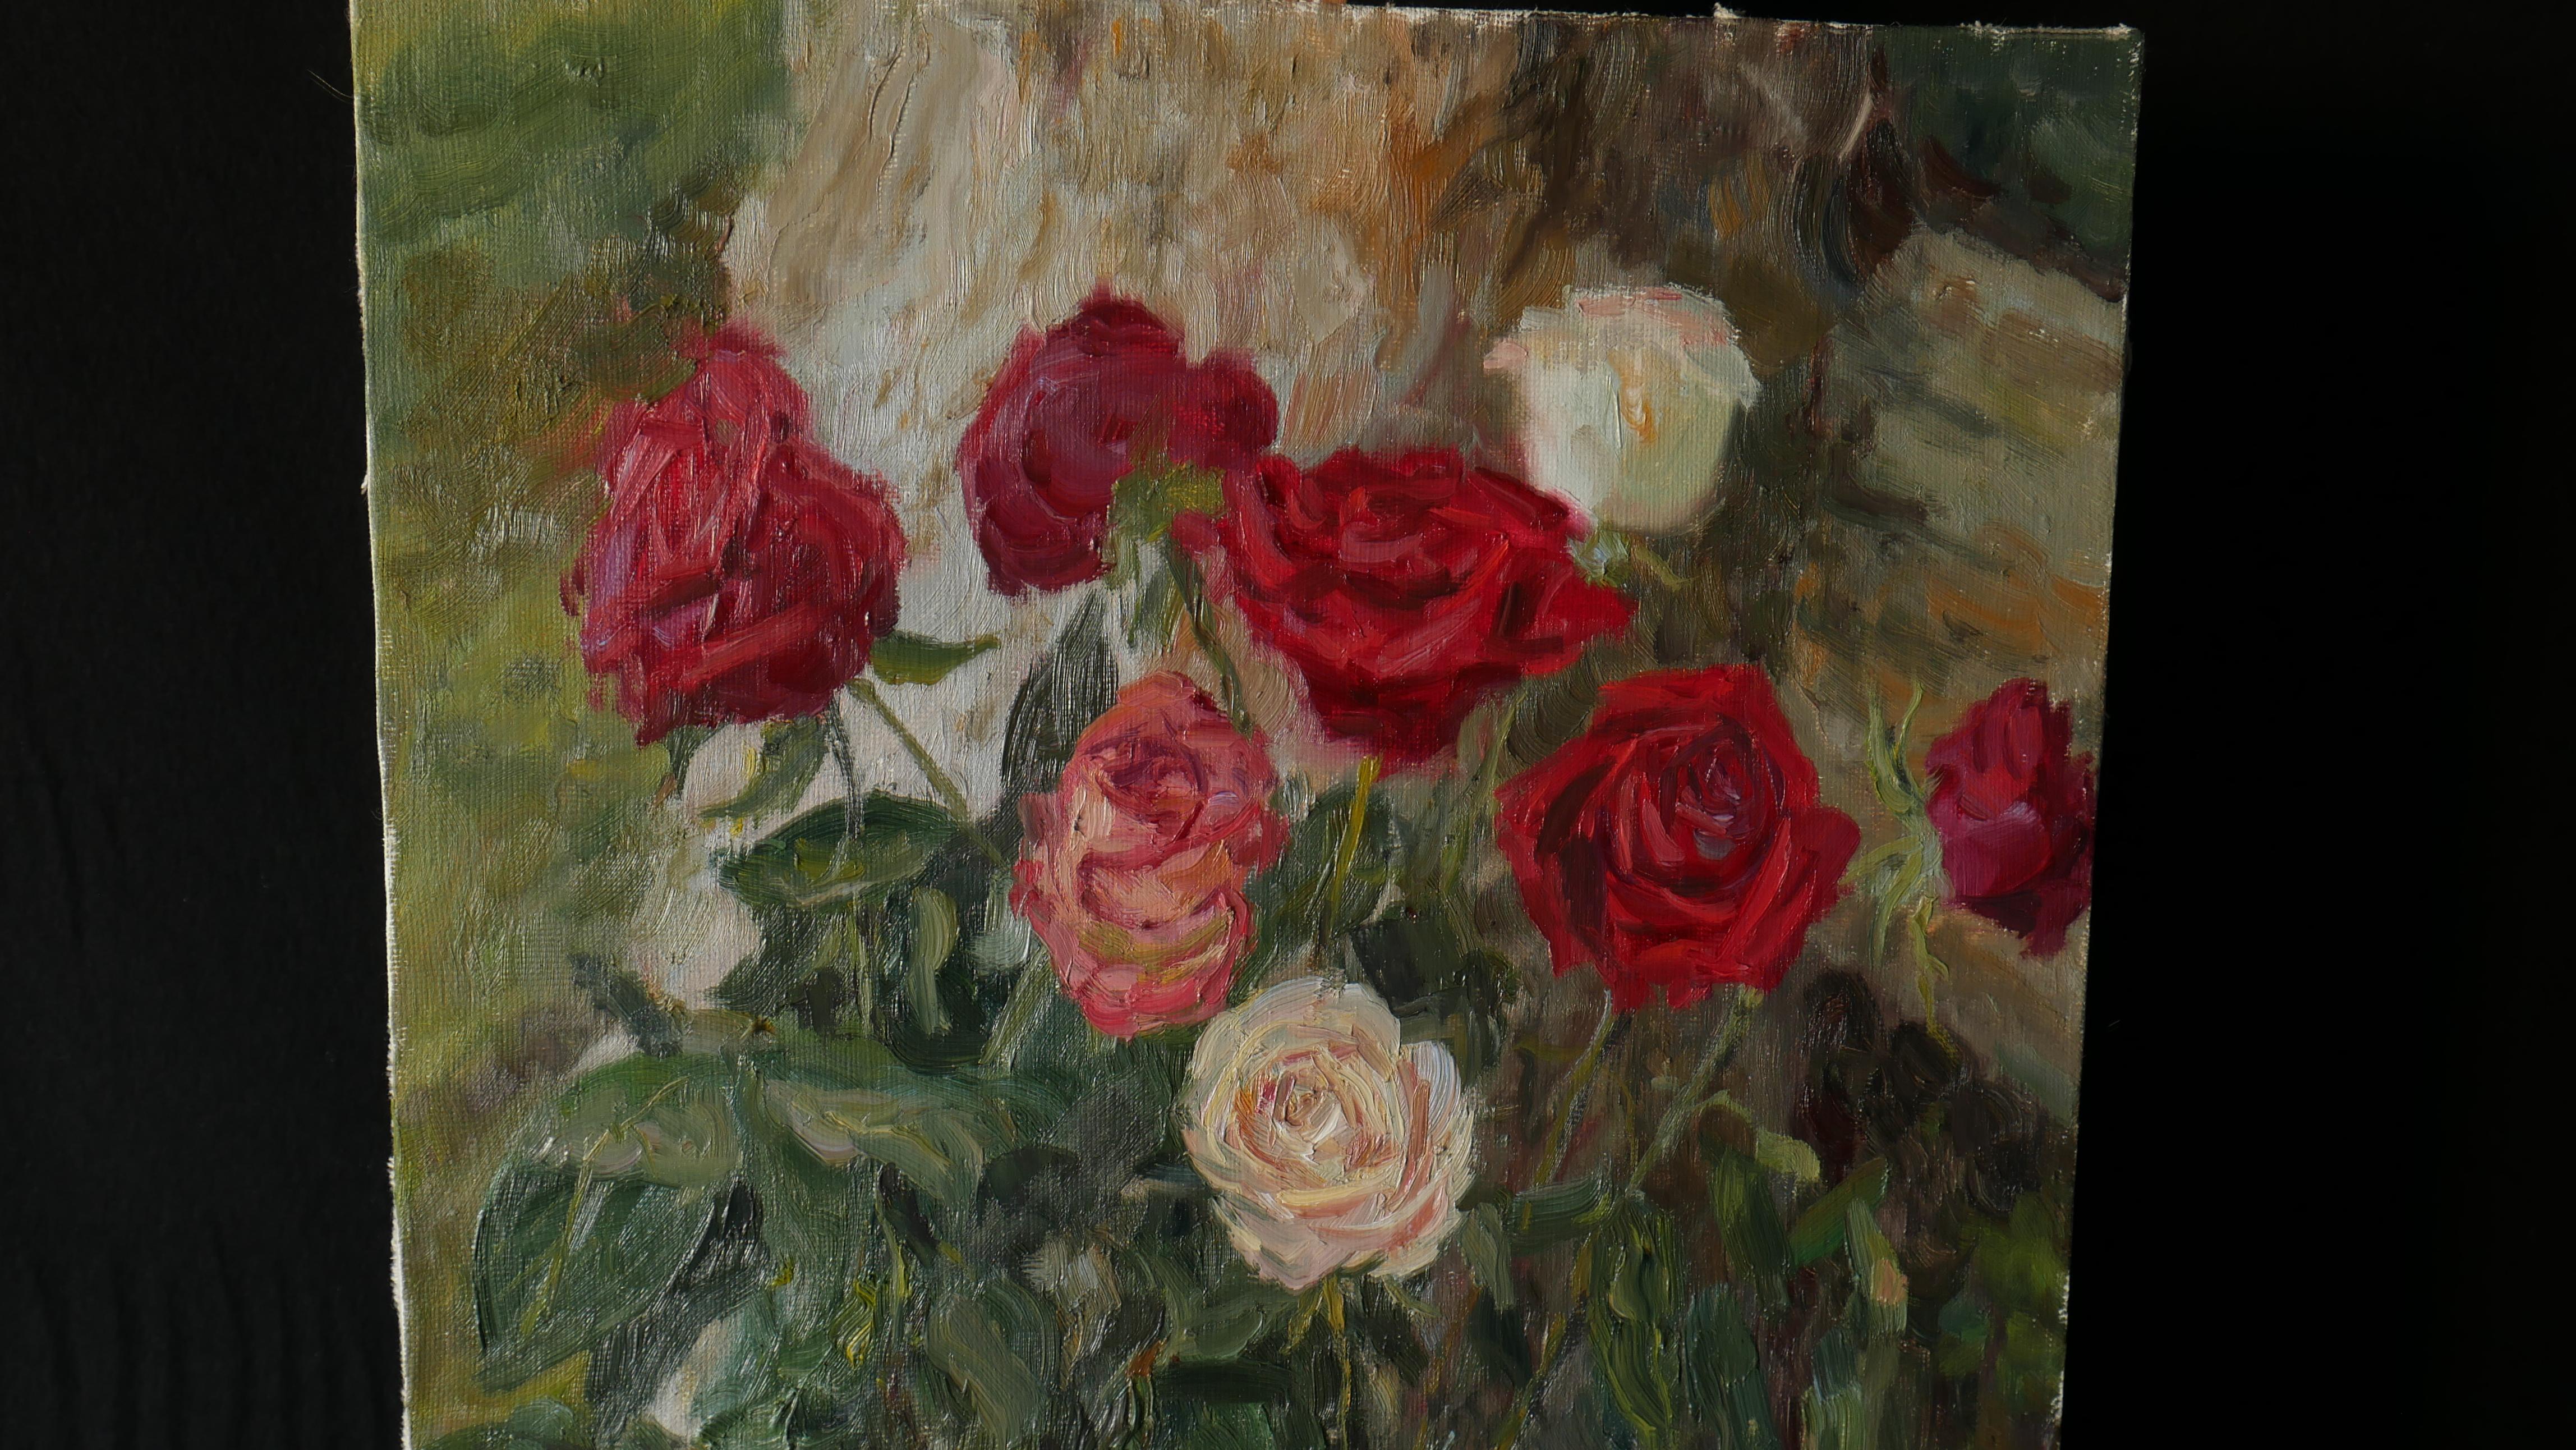 Roses In Vases - still life painting - Impressionist Painting by Nikolay Dmitriev